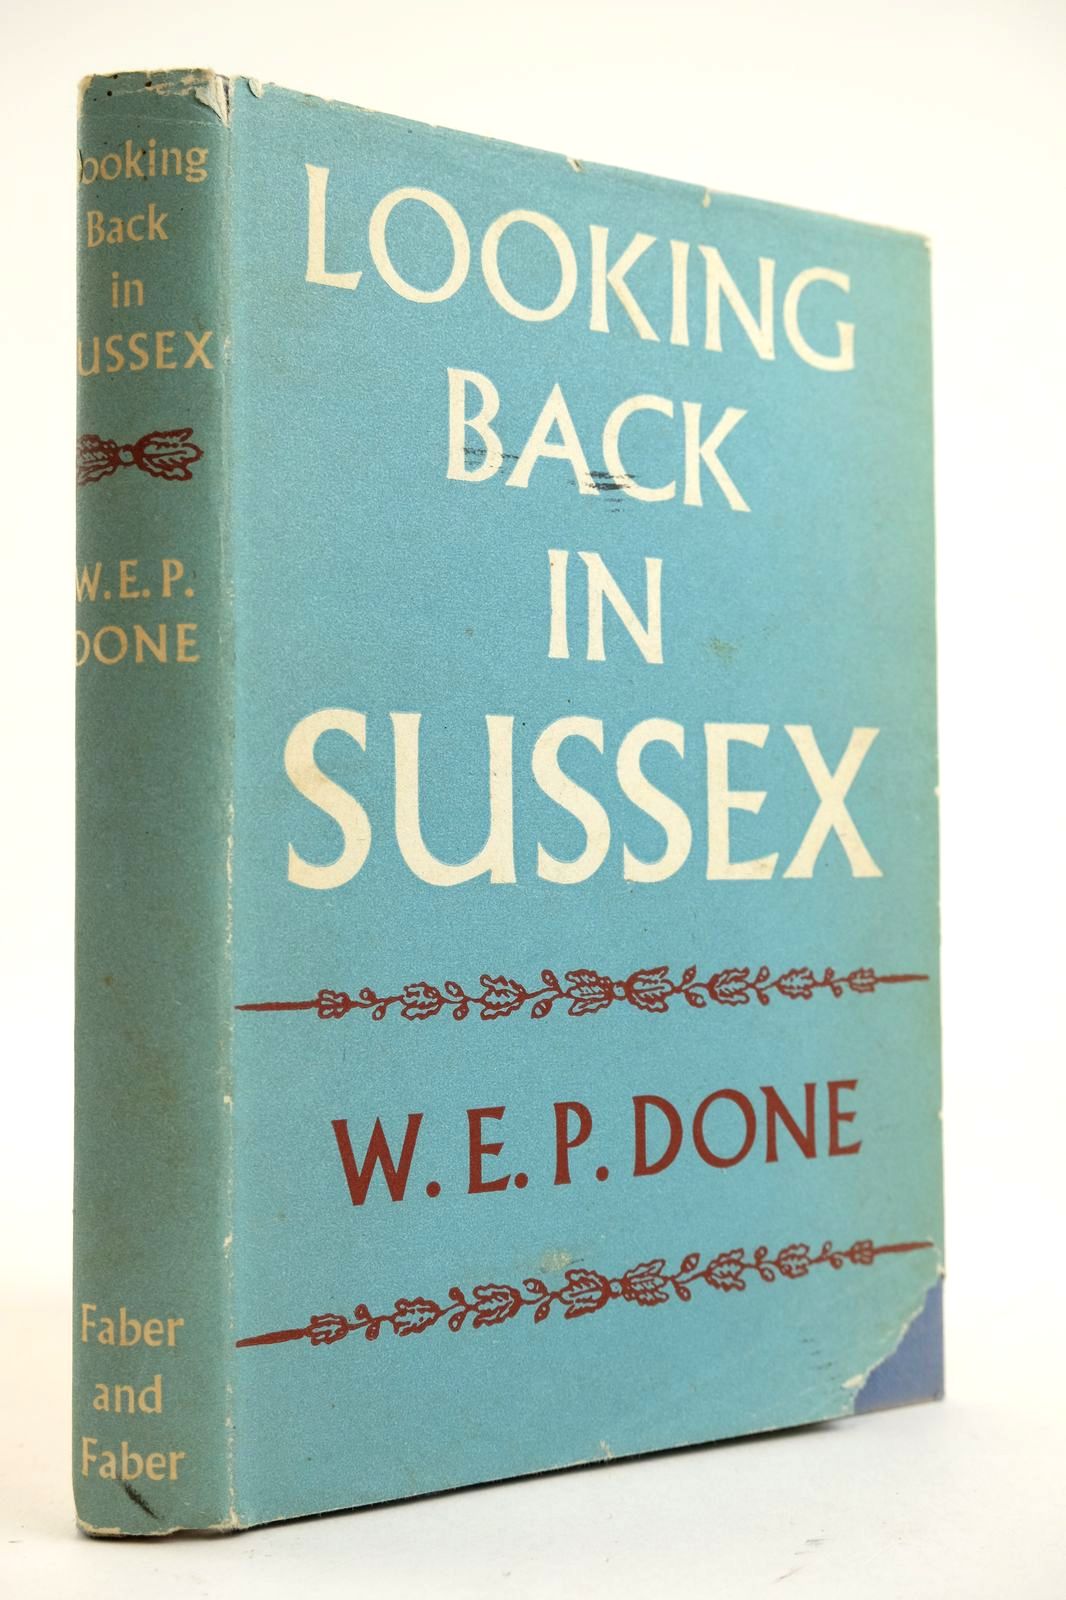 Photo of LOOKING BACK IN SUSSEX written by Done, W.E.P. published by Faber & Faber Ltd. (STOCK CODE: 2132613)  for sale by Stella & Rose's Books